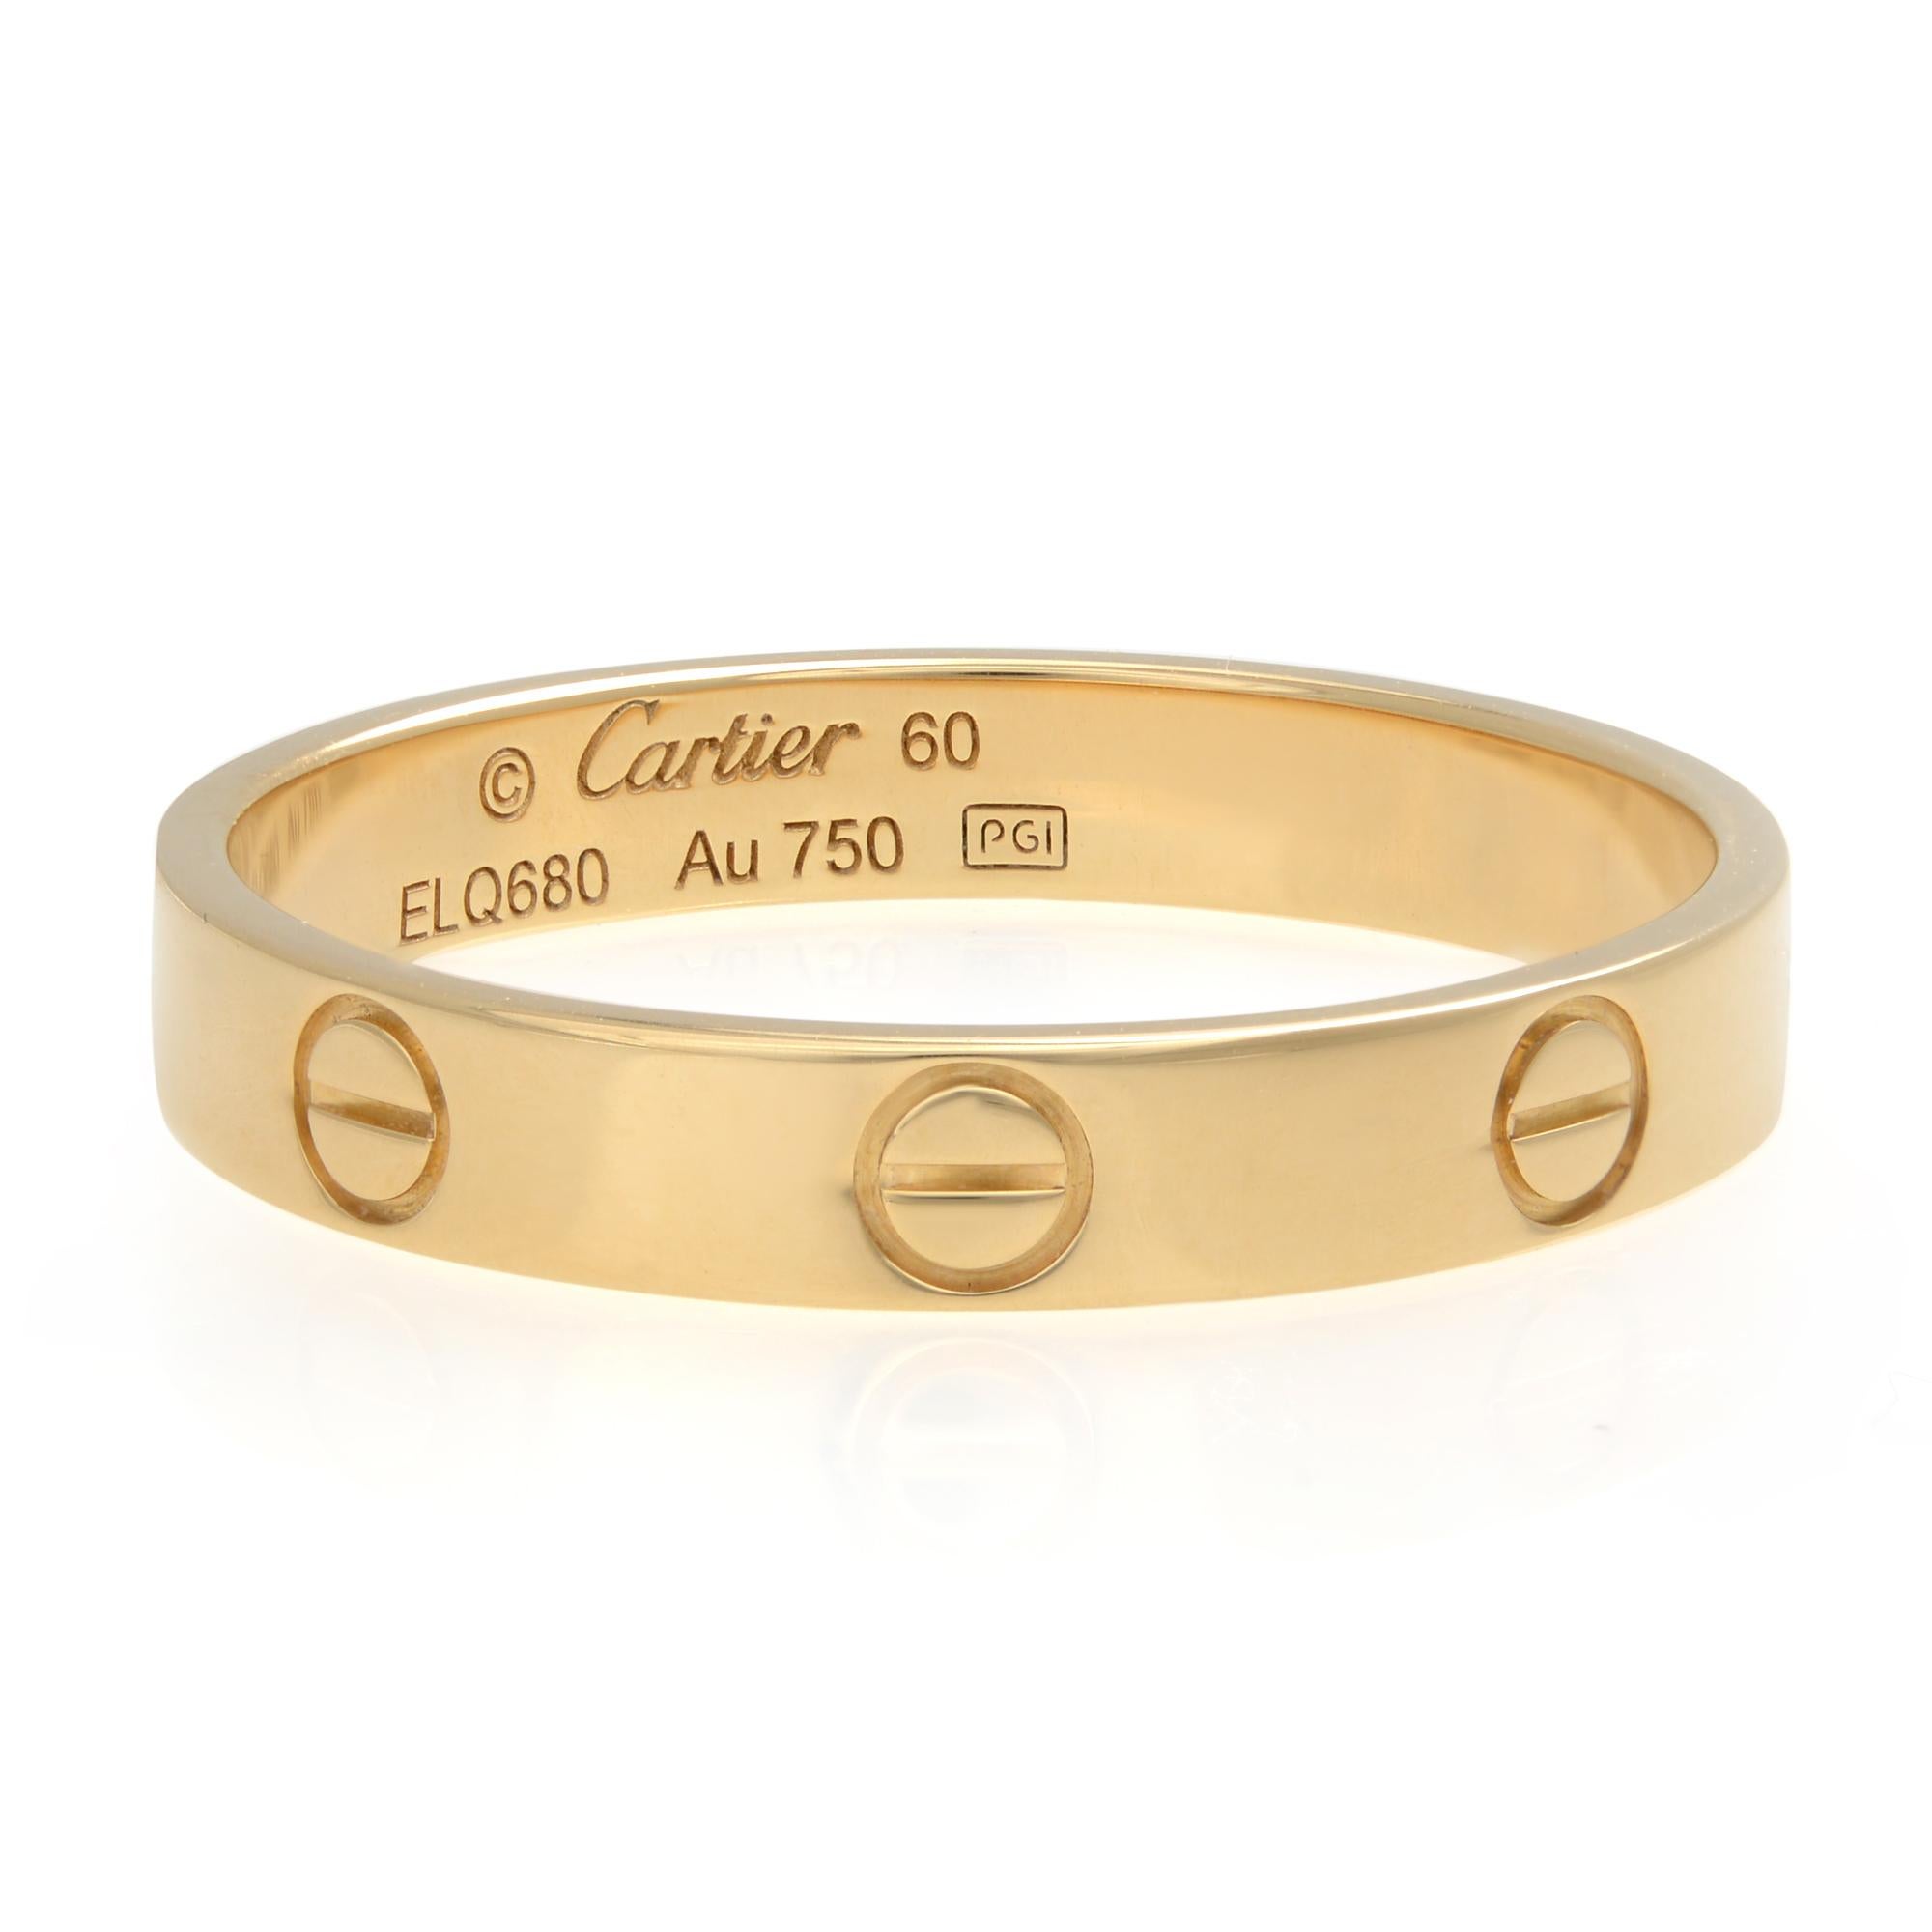 Cartier Love wedding band in 18K yellow gold. Small model Love ring. Width: 3.6mm. Ring size 60 US 9.25. Great pre owned condition. Comes with box. Papers are not included. 